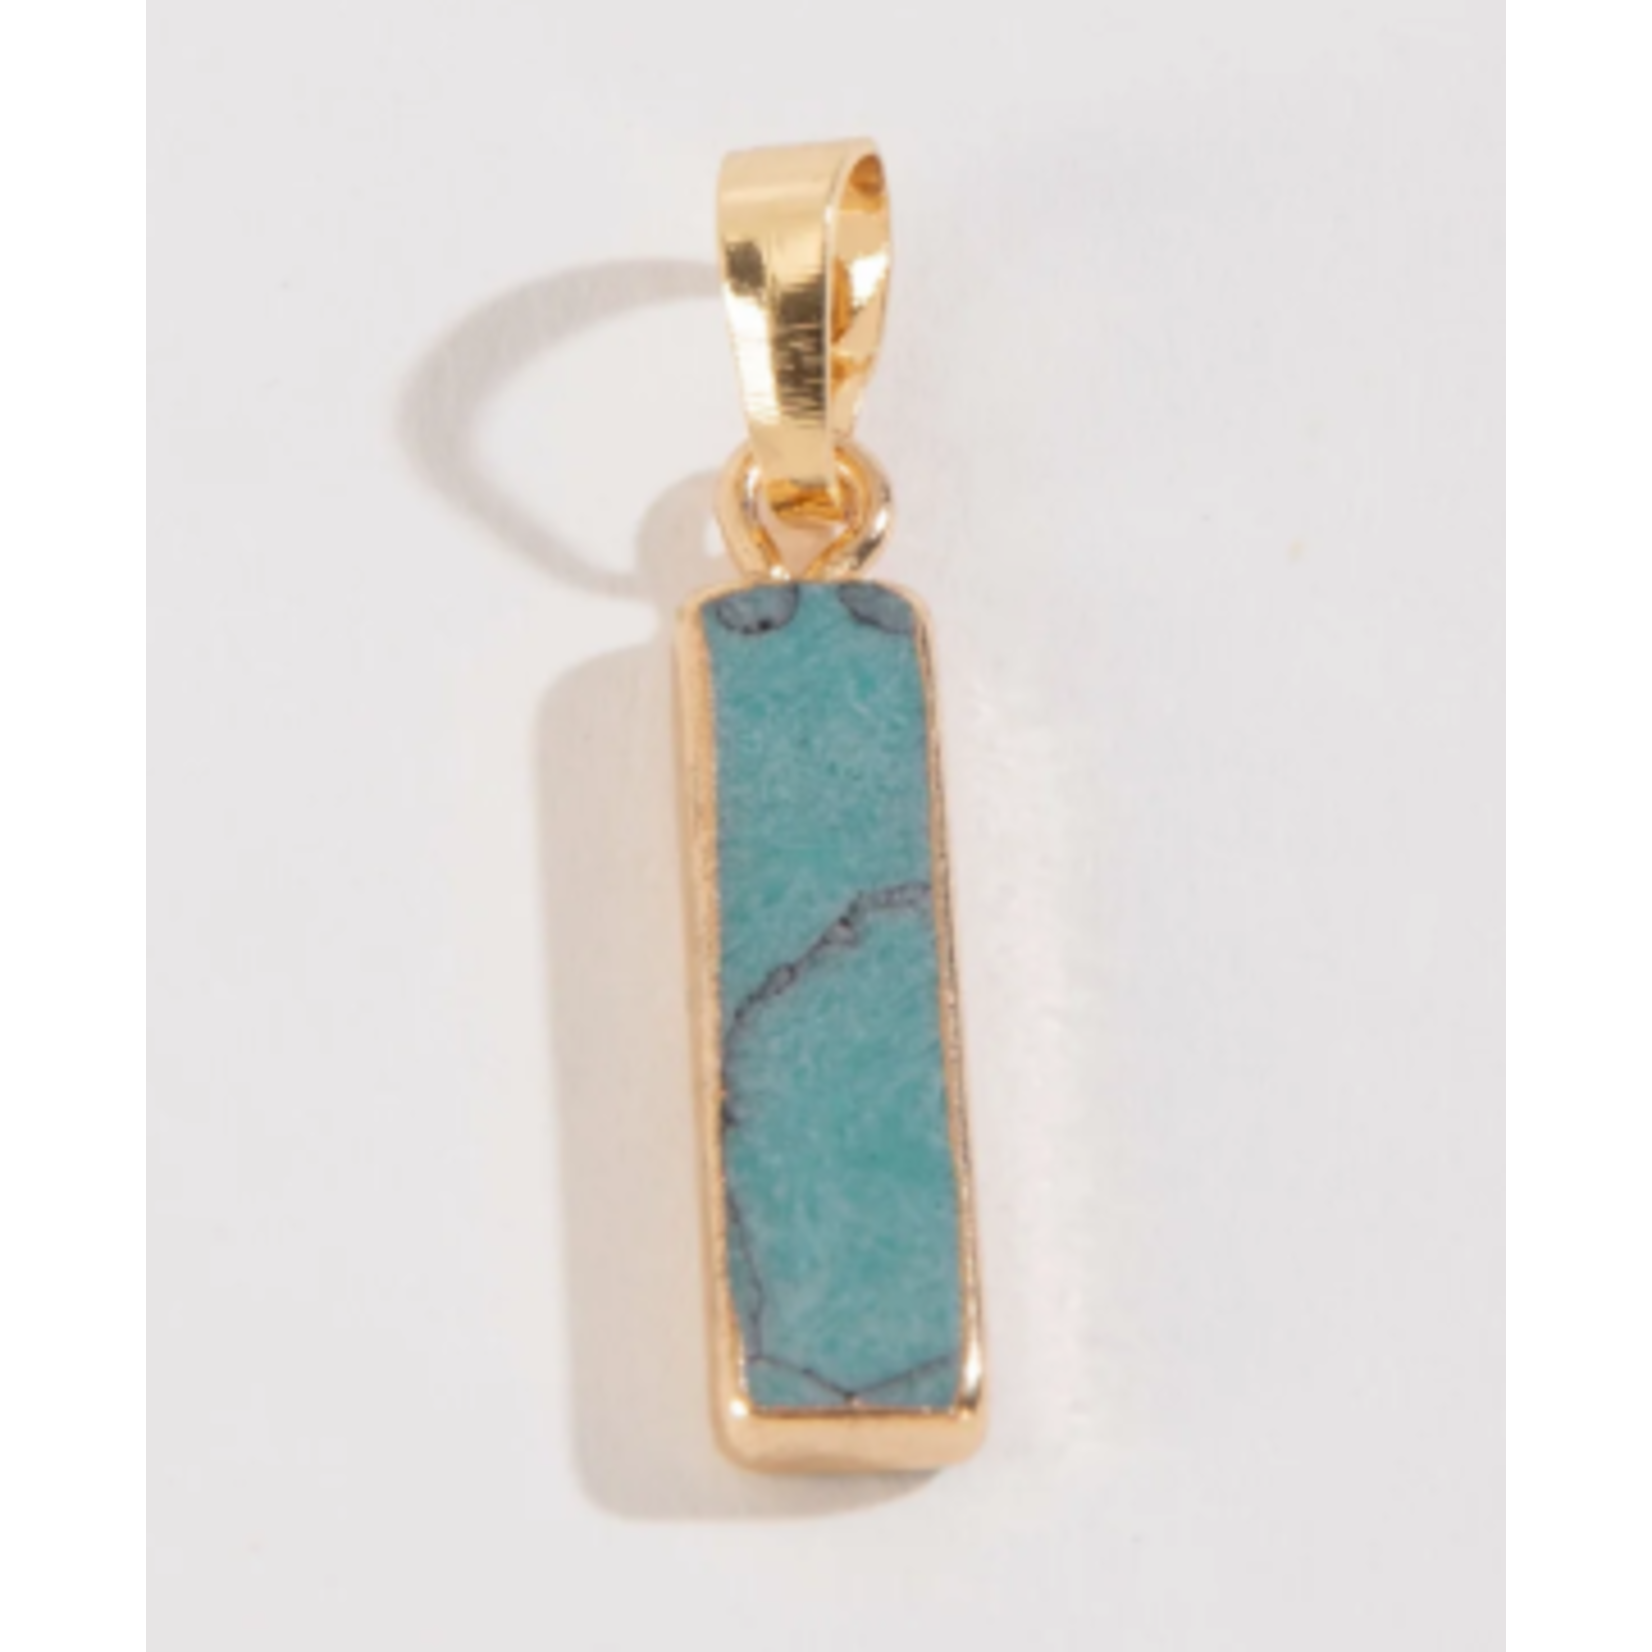 Howards Layer Me Turquoise Pendant Charm